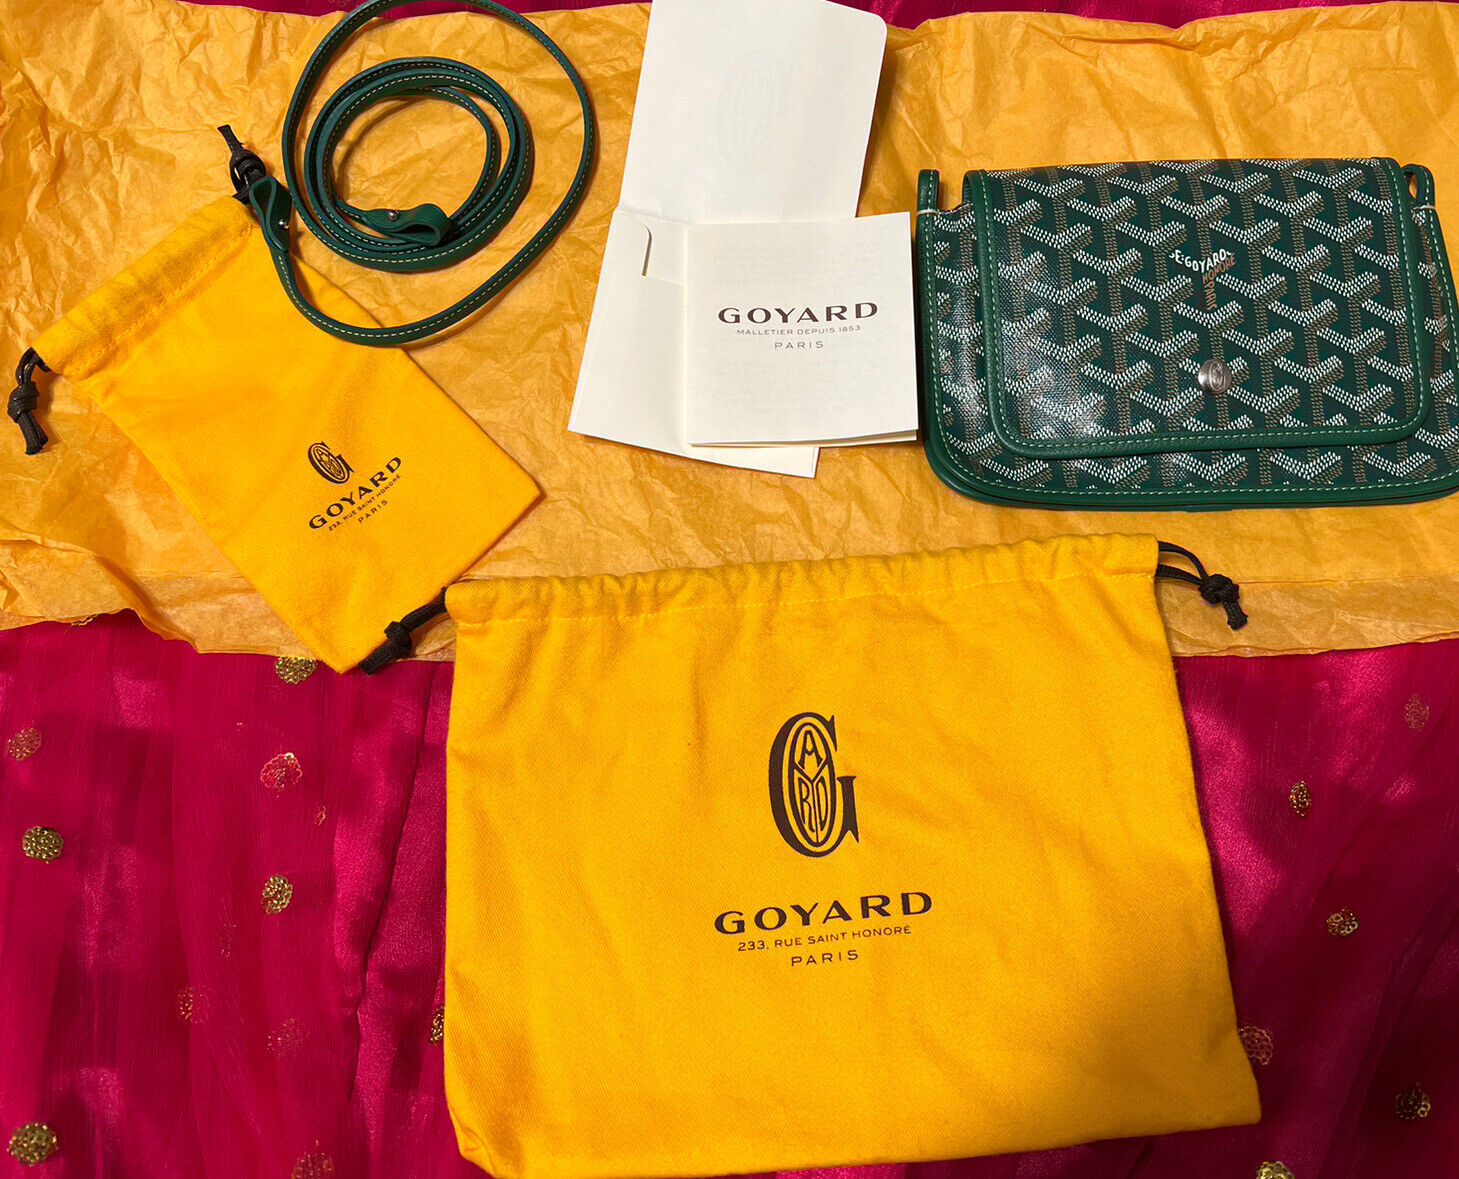 Goyard on Dog iPhone Wallpapers Free Download